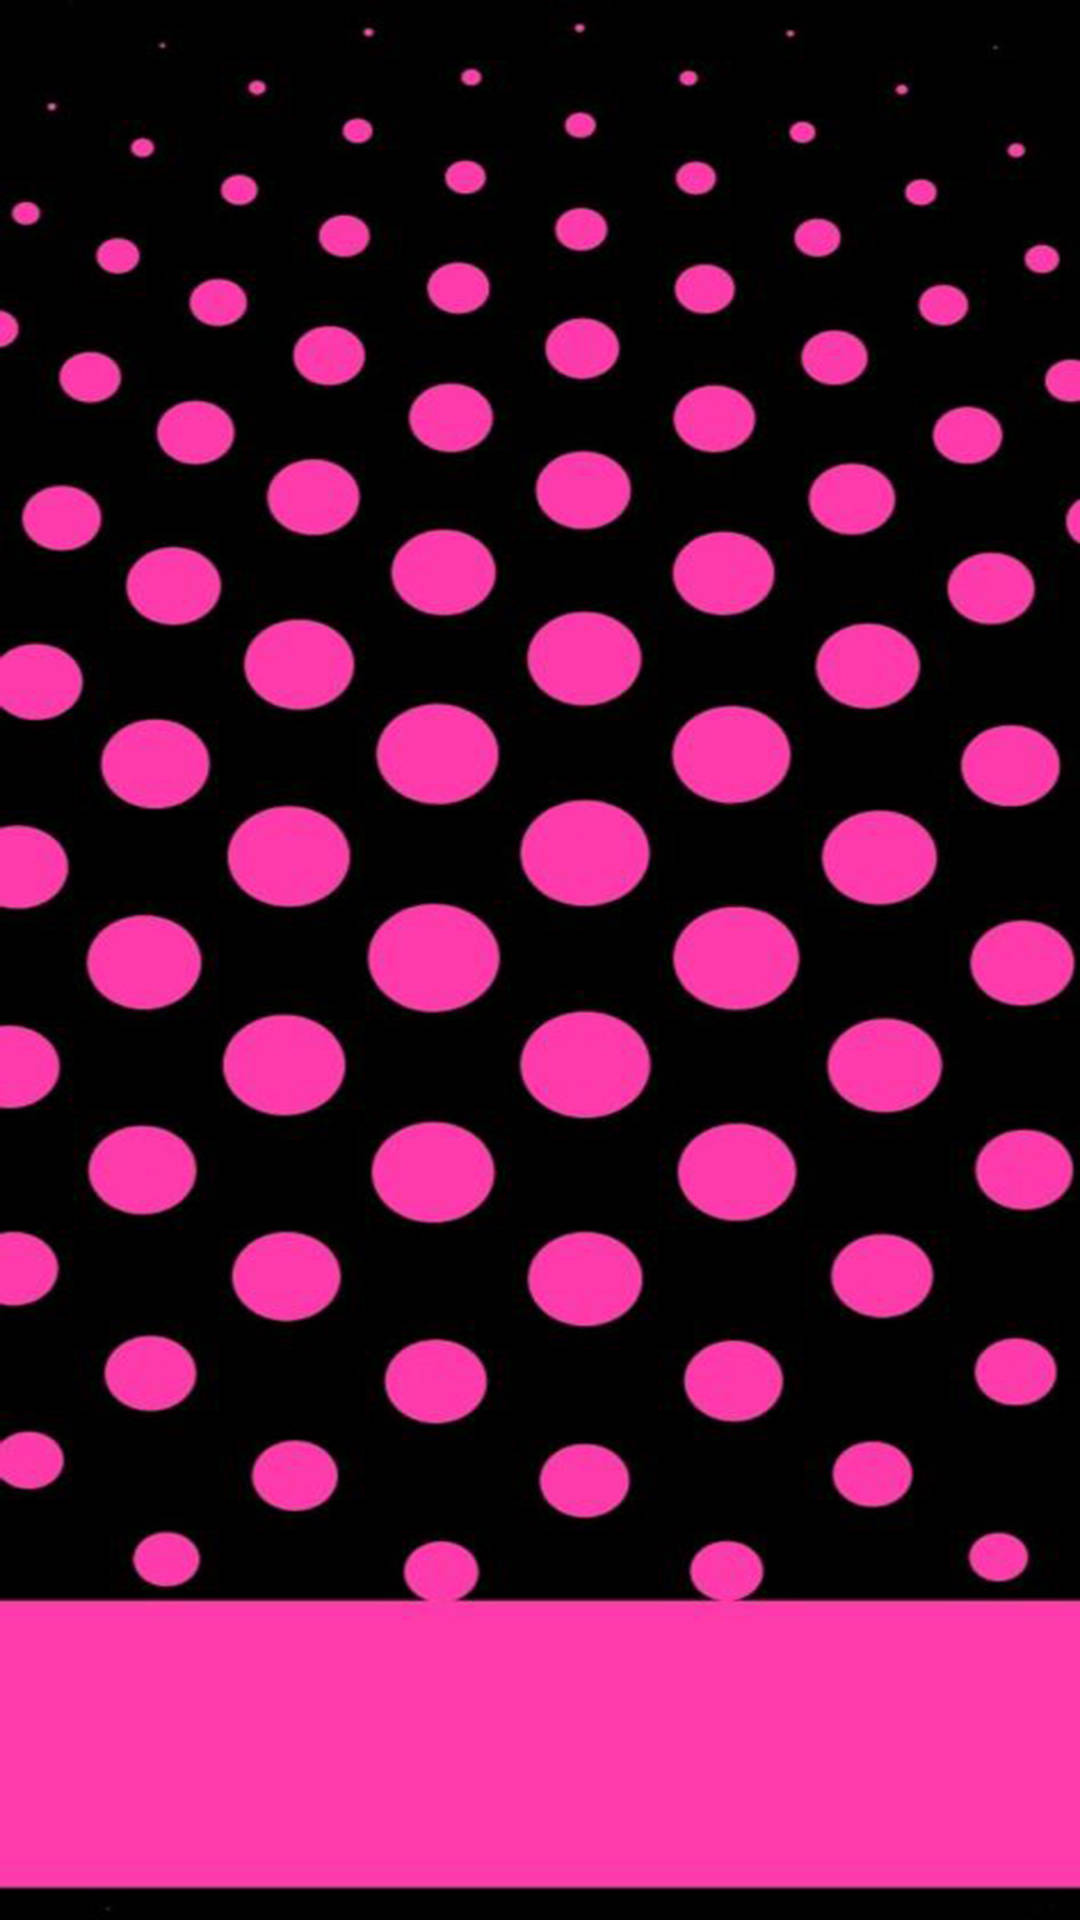 Black And Pink Aesthetic Circular Patterns Picture